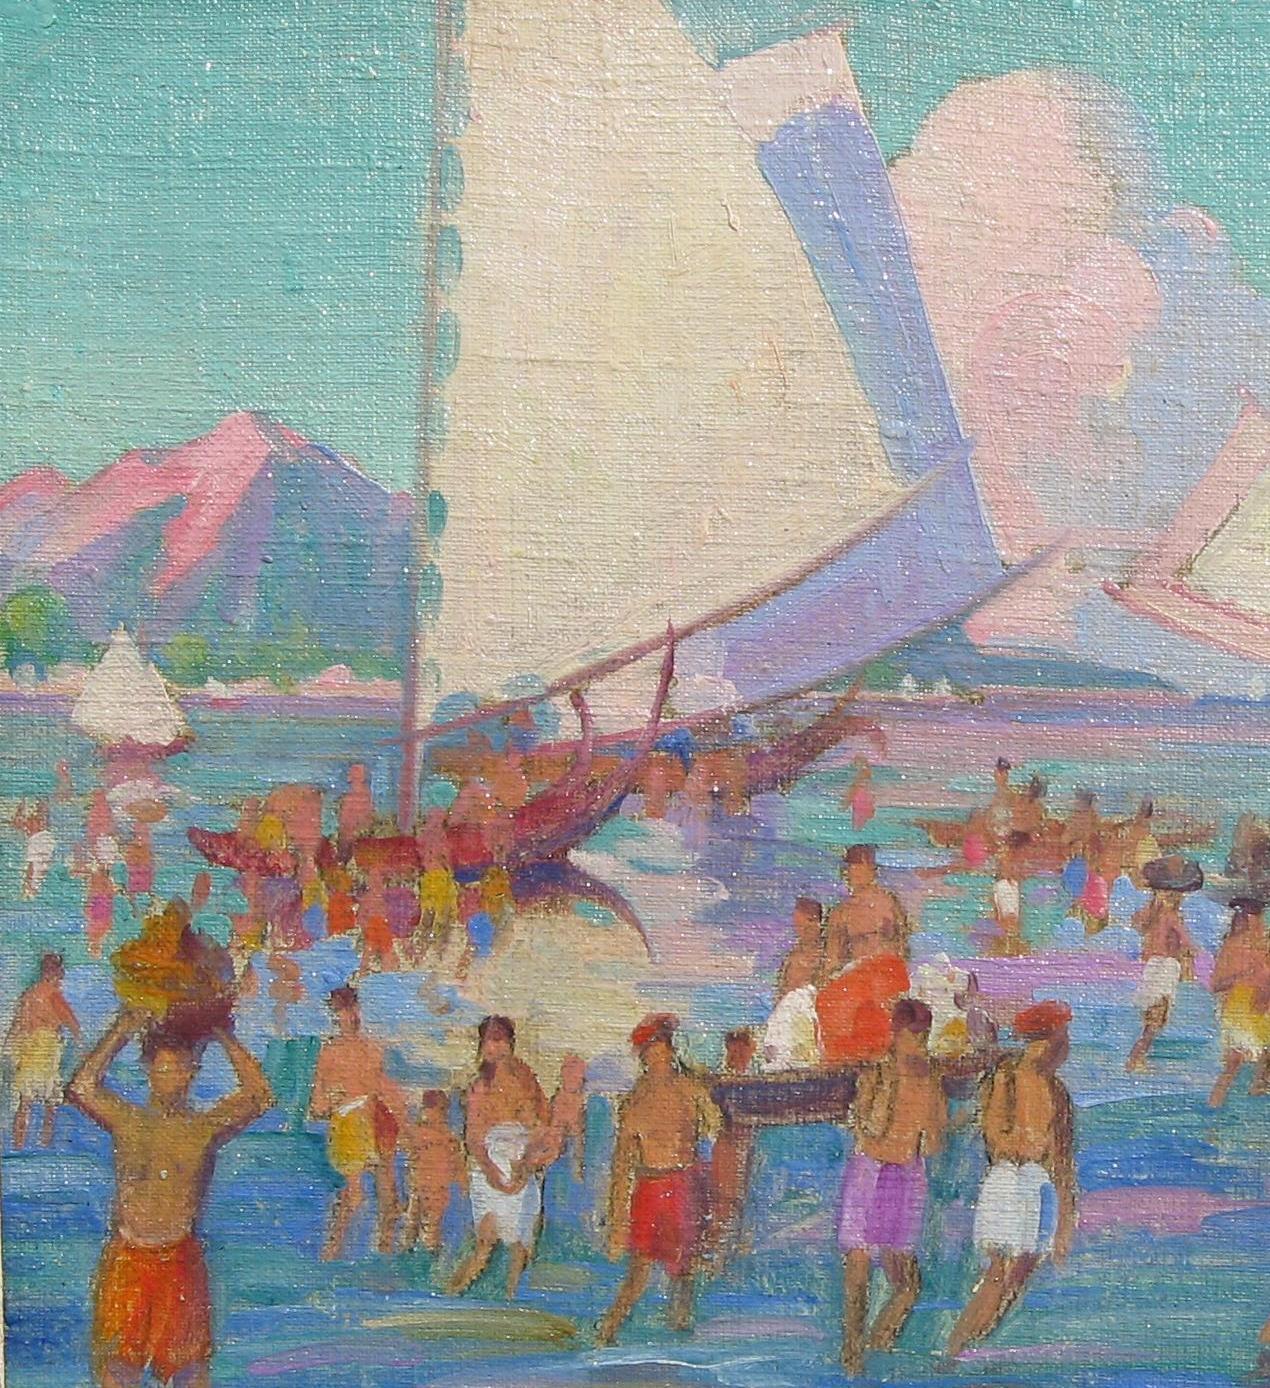 Carl Brandien, New York National Academy Artist, Oil Painting, 1930, Bali In Excellent Condition For Sale In Phoenix, AZ